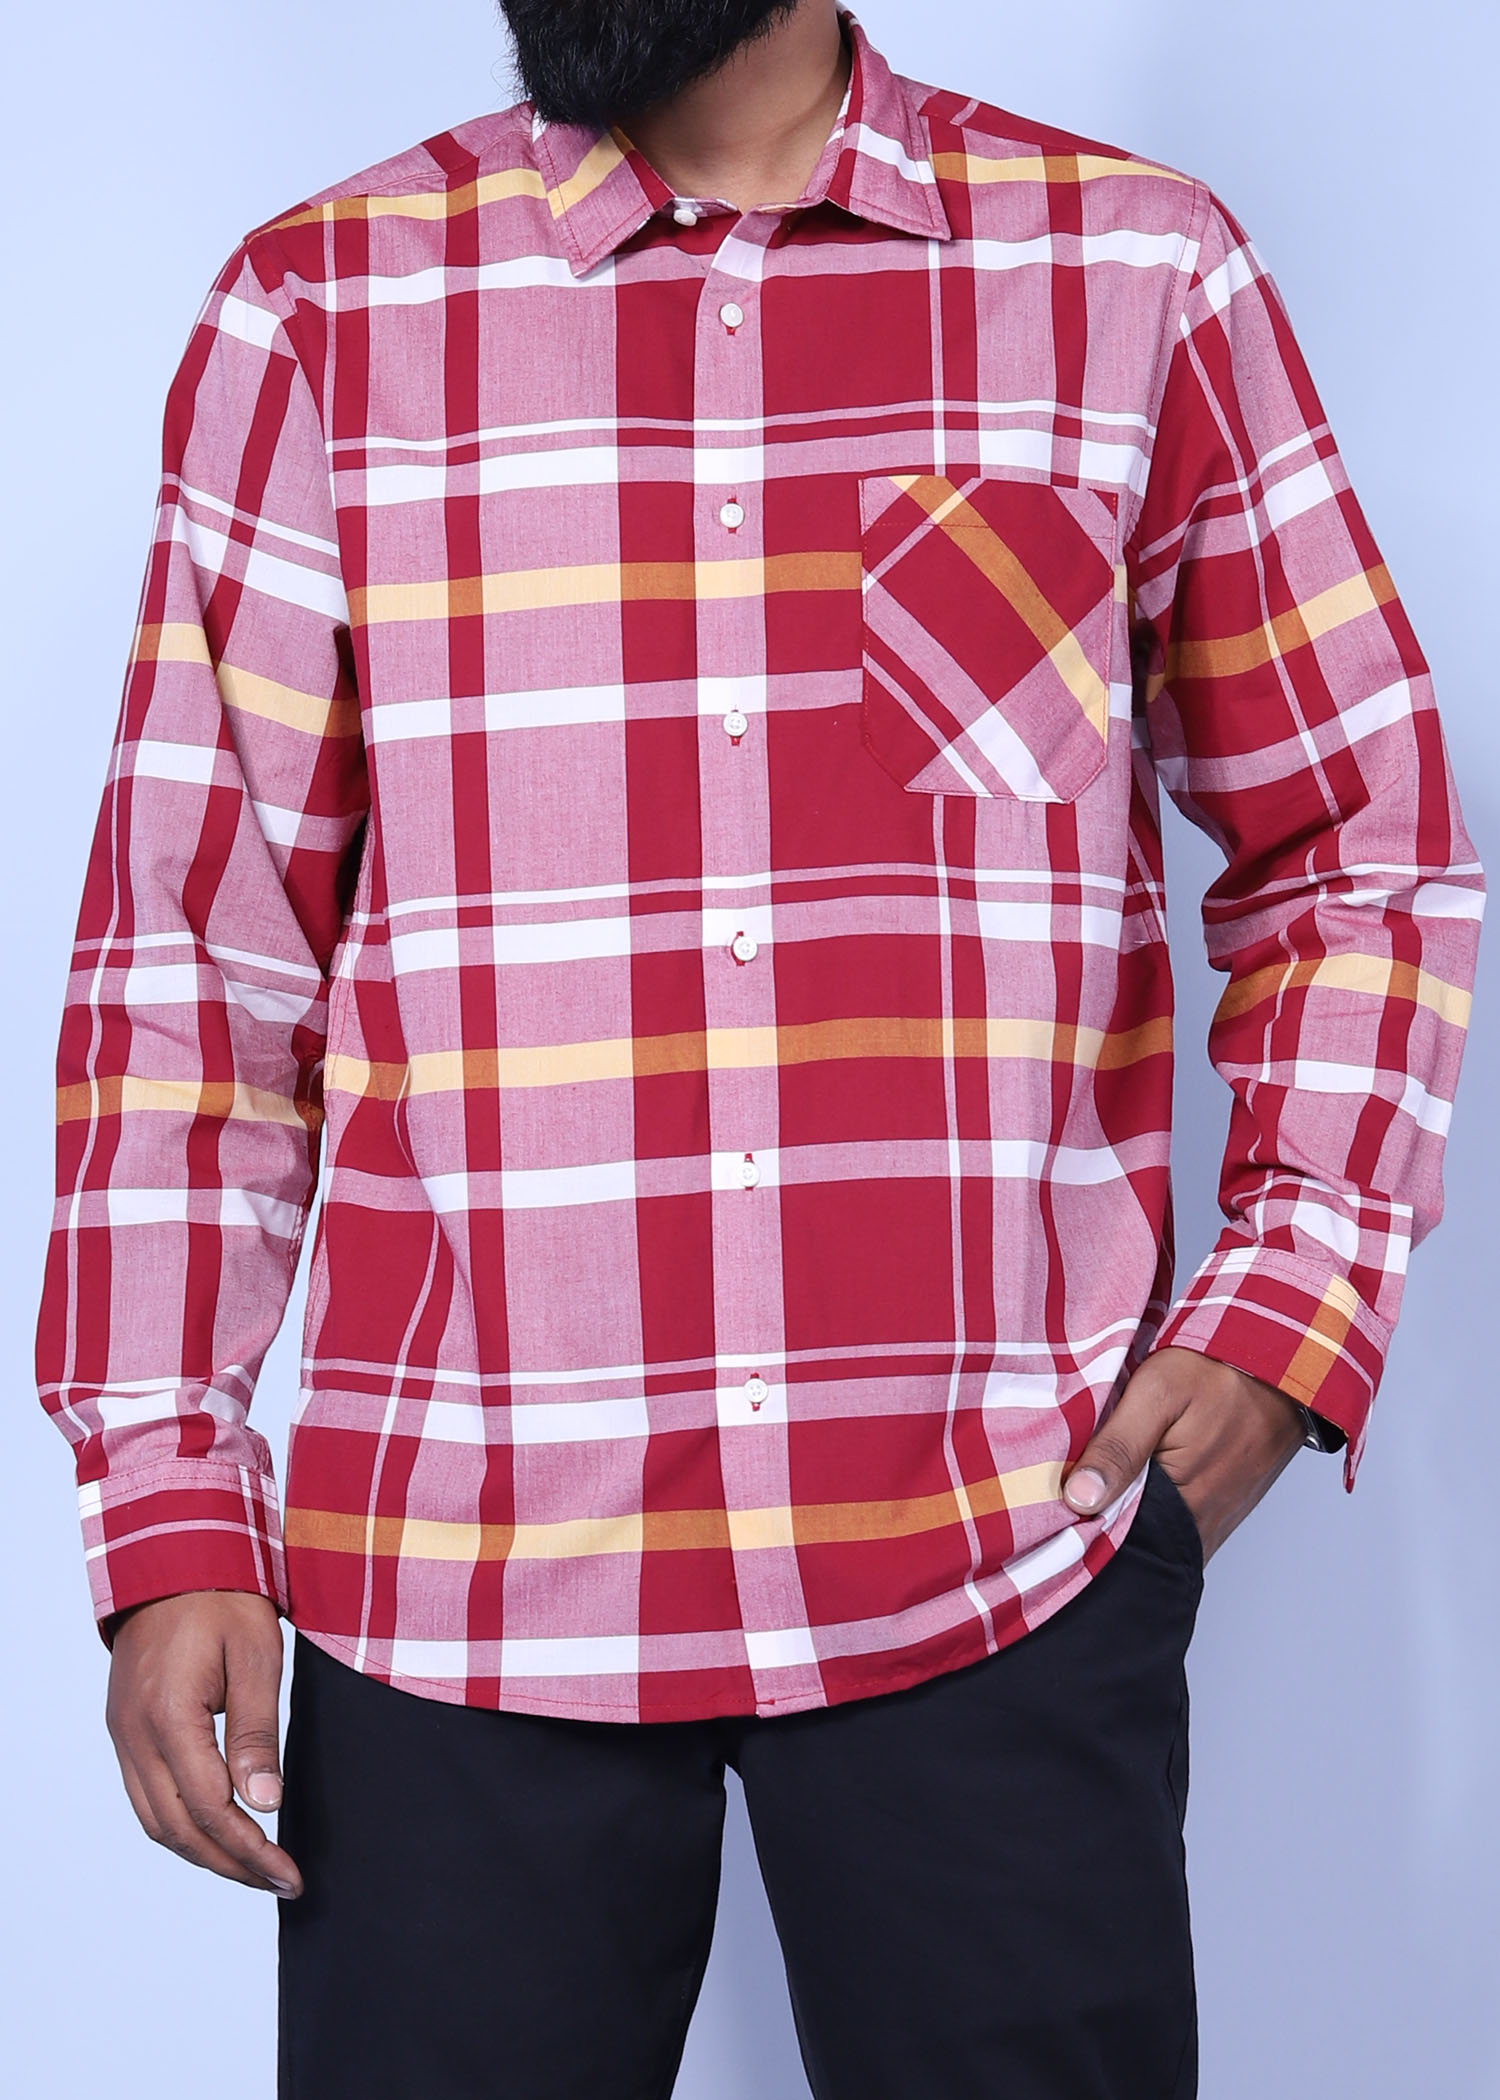 istanbul xxii fs shirt lt binking red color facecropped